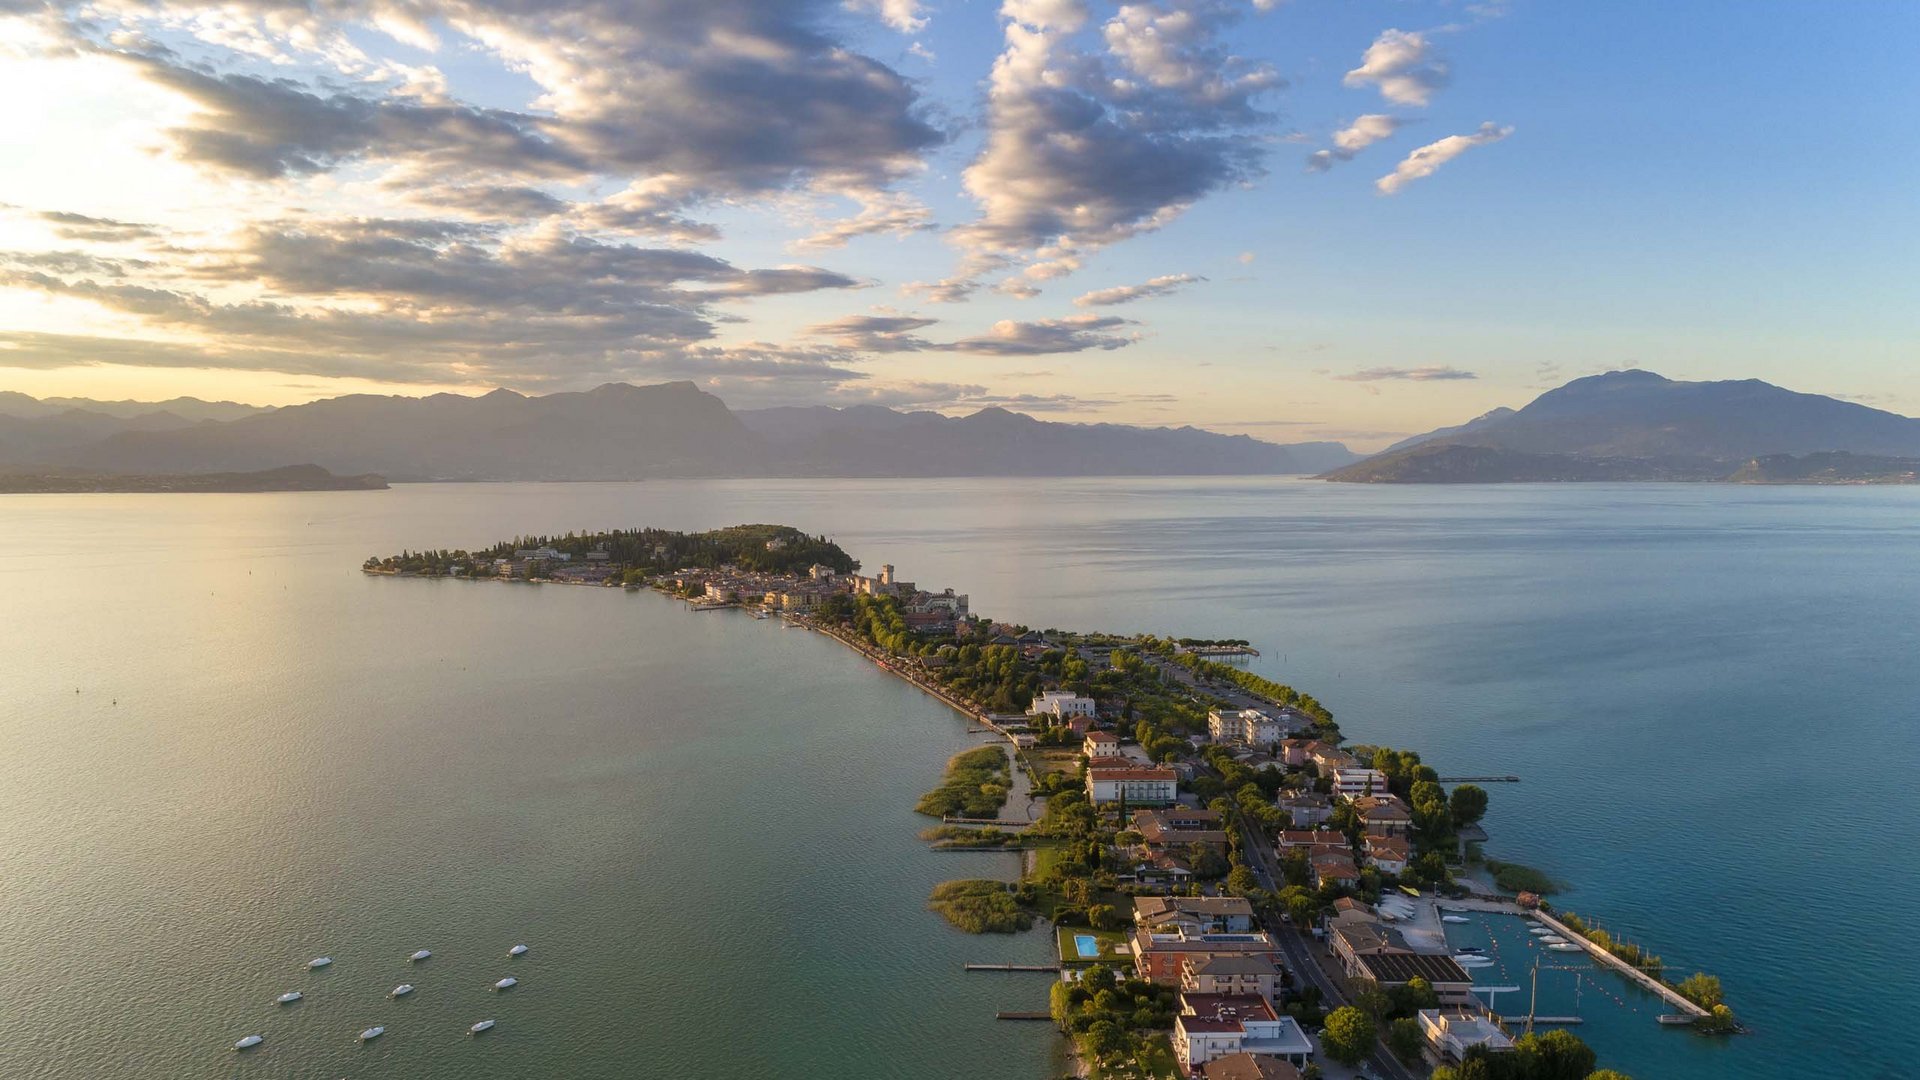 Hotel on Lake Garda: a holiday full of experiences